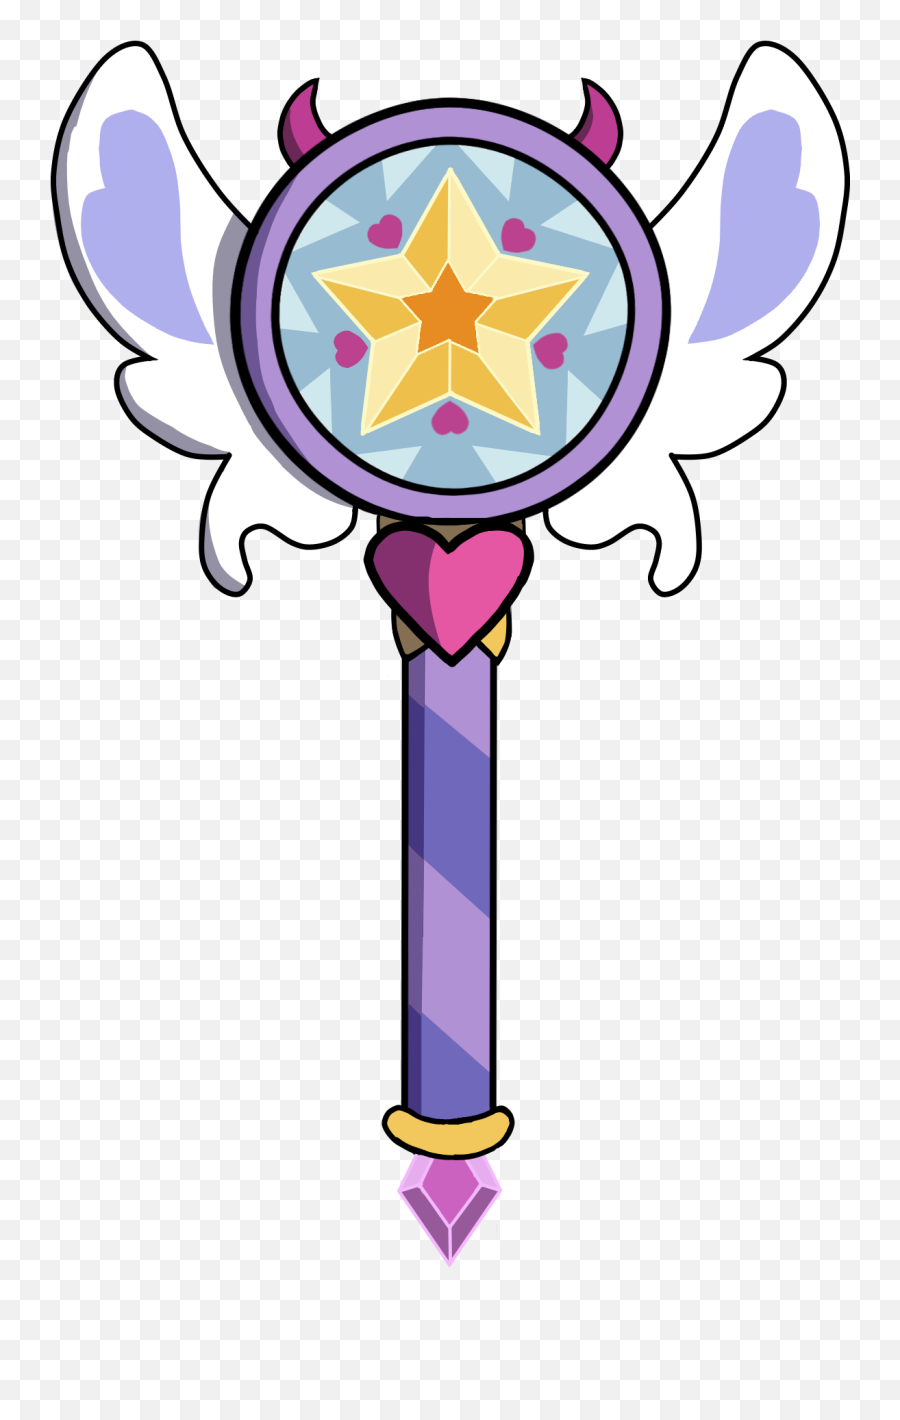 Star Vs Stars Wand The Forces Of Evil Talkingbreadcoil - Star Vs The Forces Of Evil Wand Emoji,Purple Heart Emoticon Numberpad